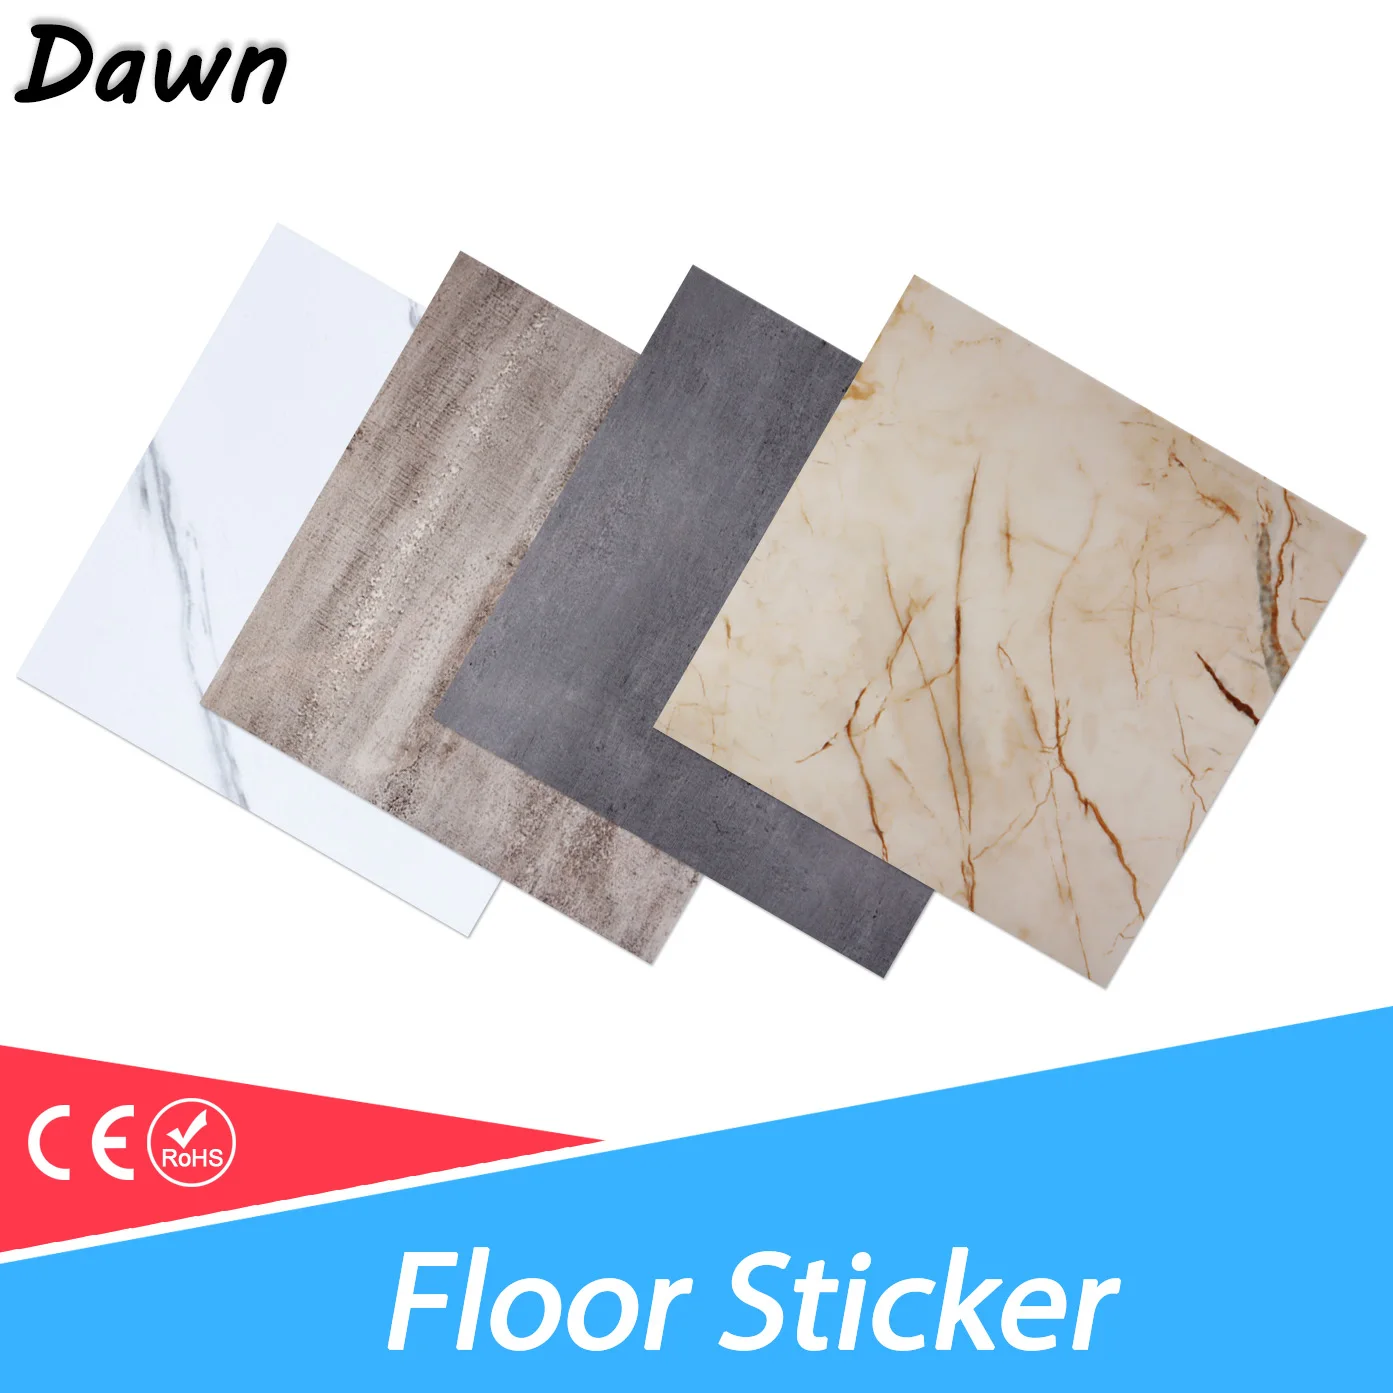 Wall Stickers Self Adhesive Waterproof Marble  Floor Sticker Bathroom living room Wall paper Renovation Decals Wall Ground Decor